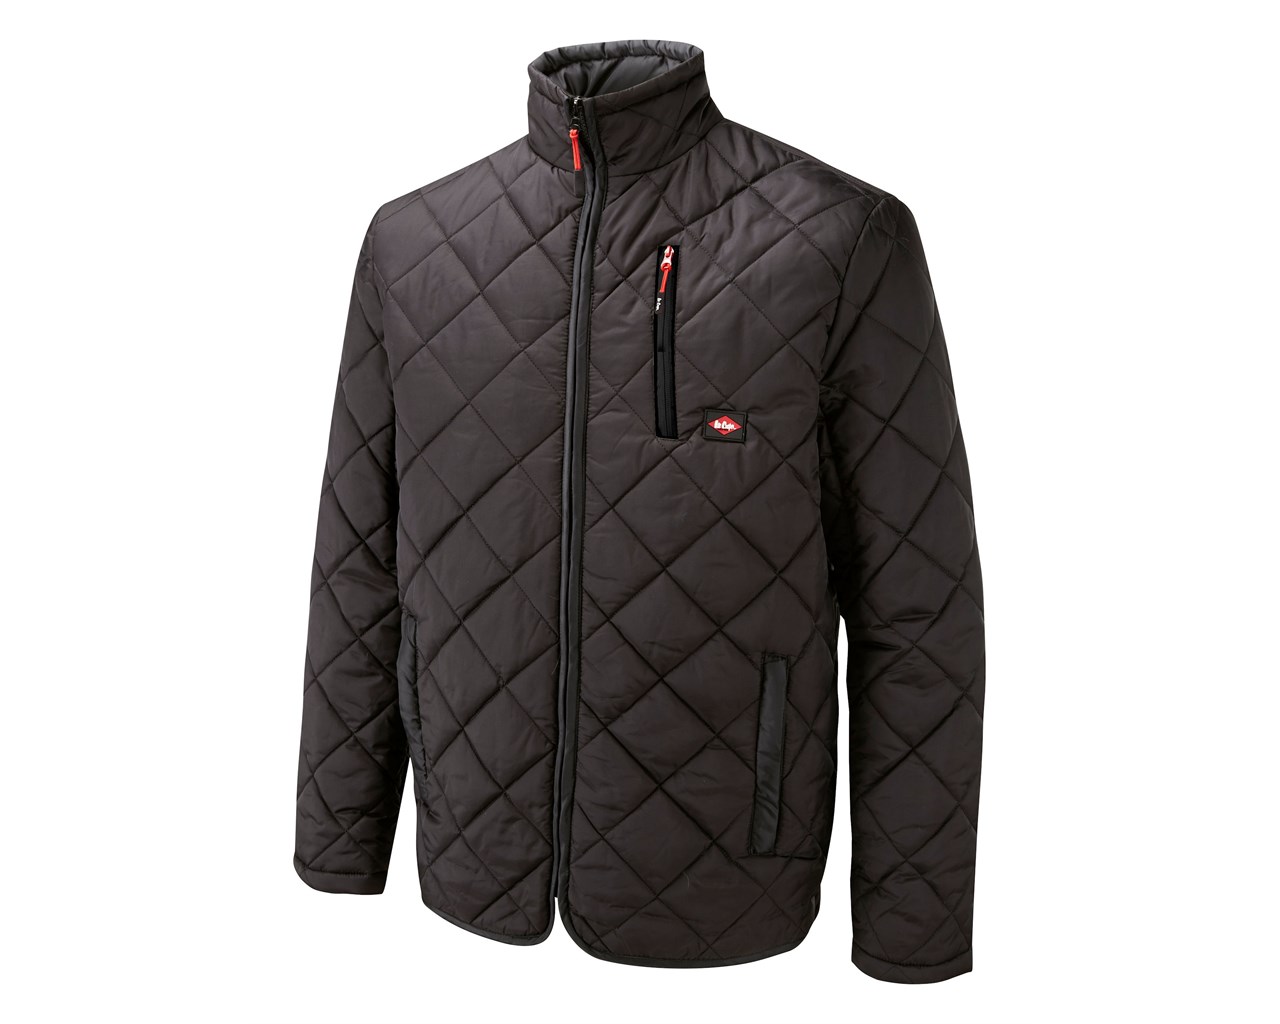 Lee Cooper Nylon Quilted Jacket 436